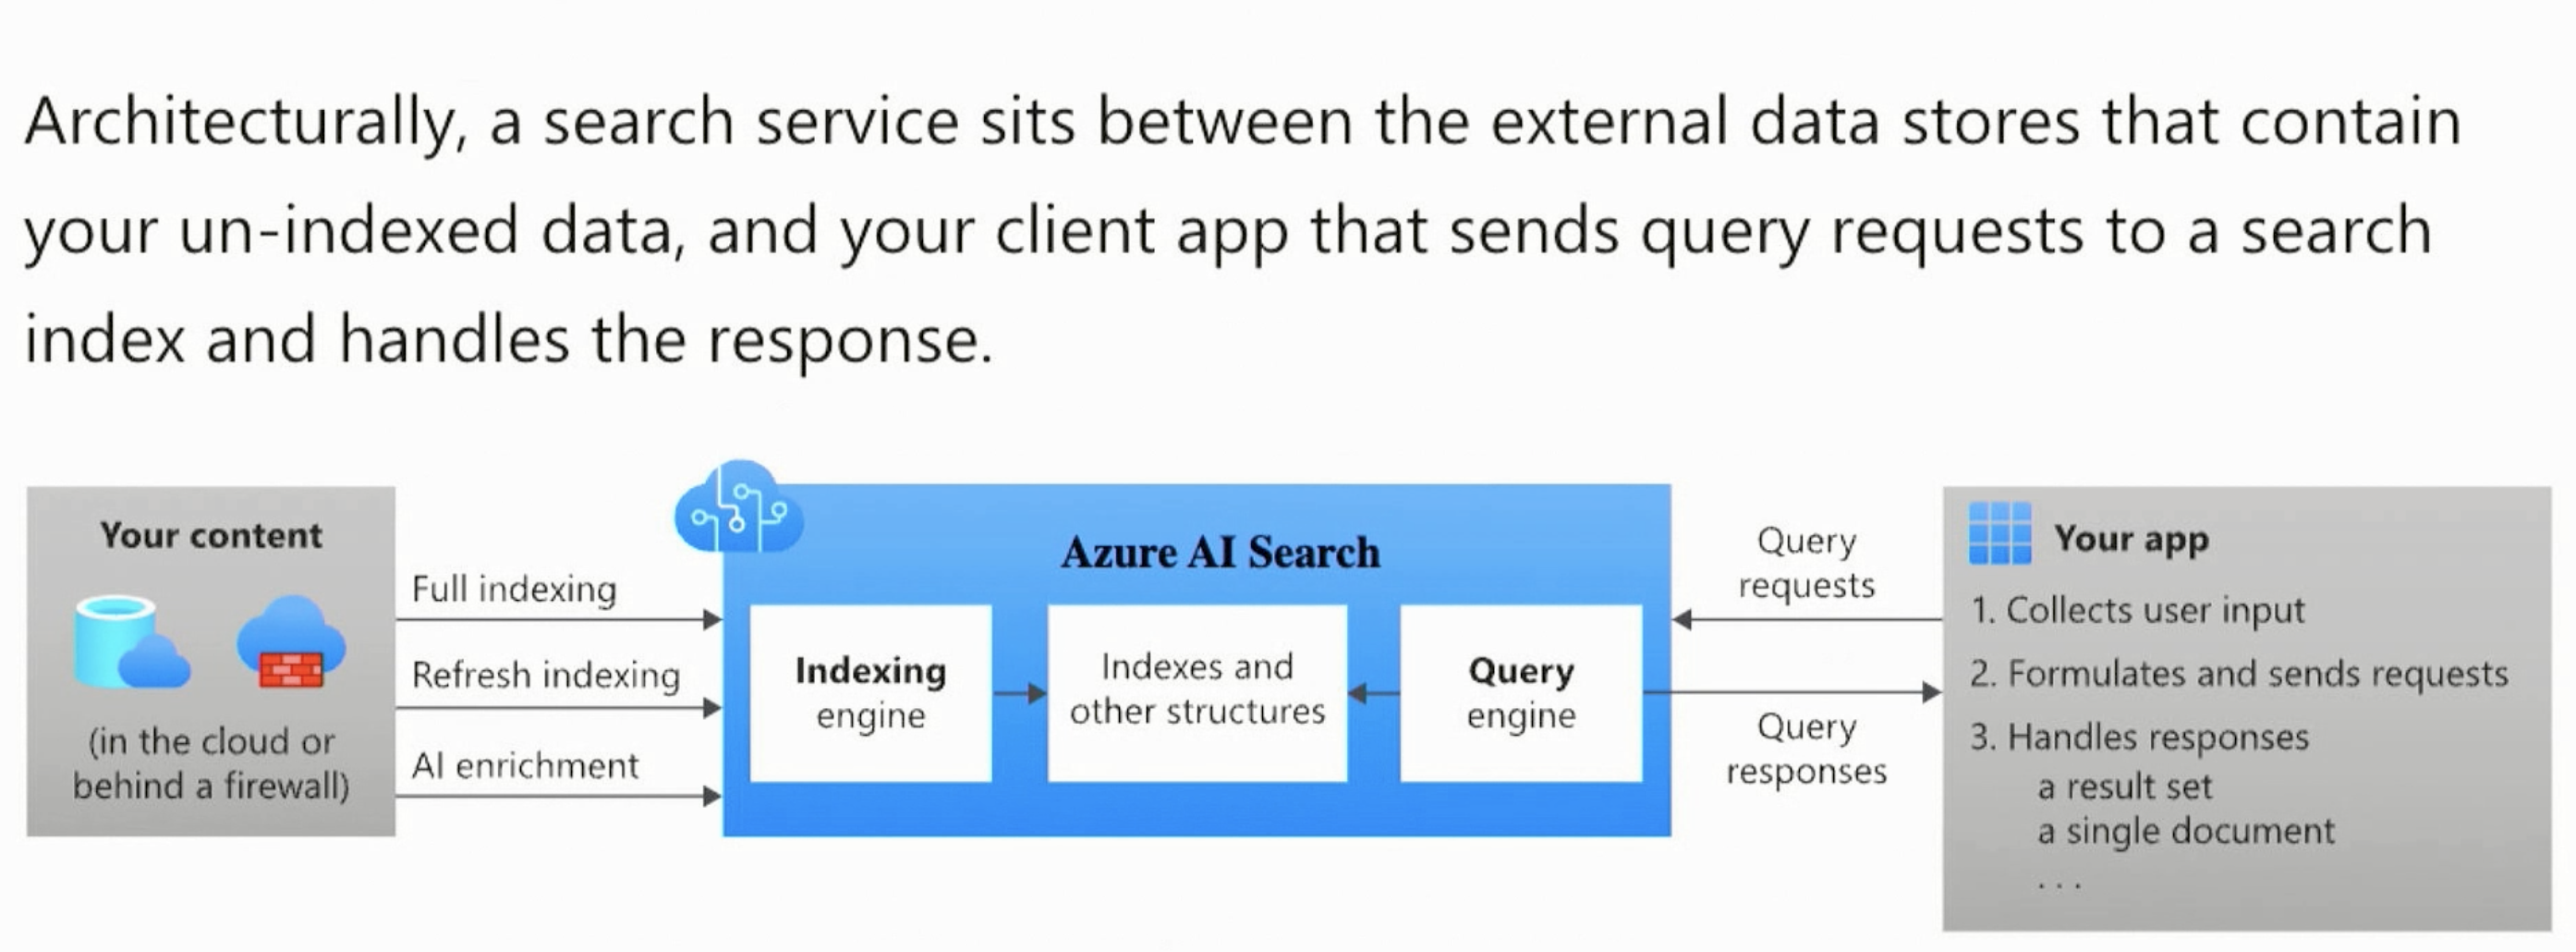 Natural Language Processing for user queries